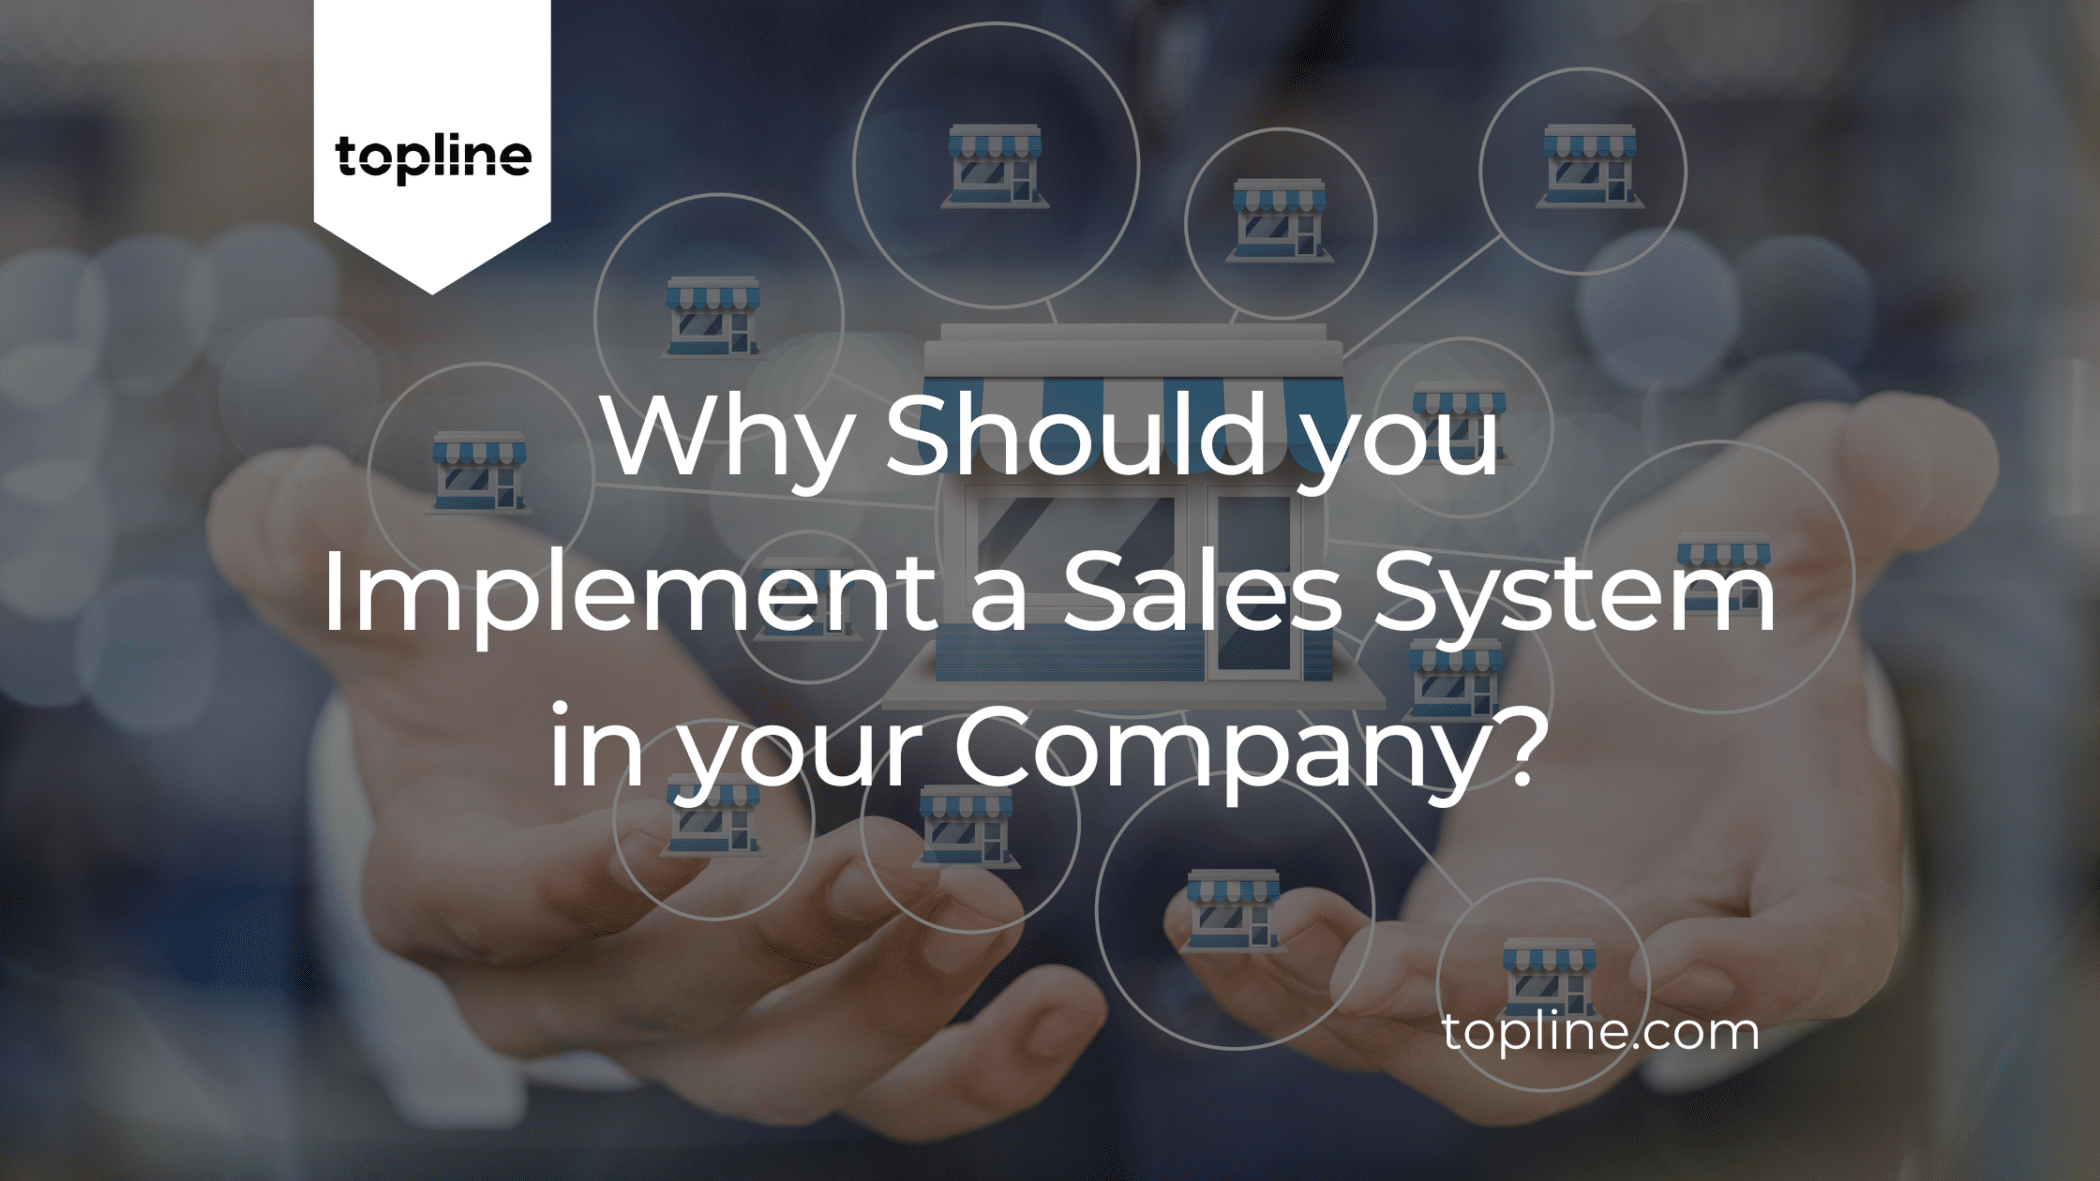 Why Should you Implement a Sales System in your company?